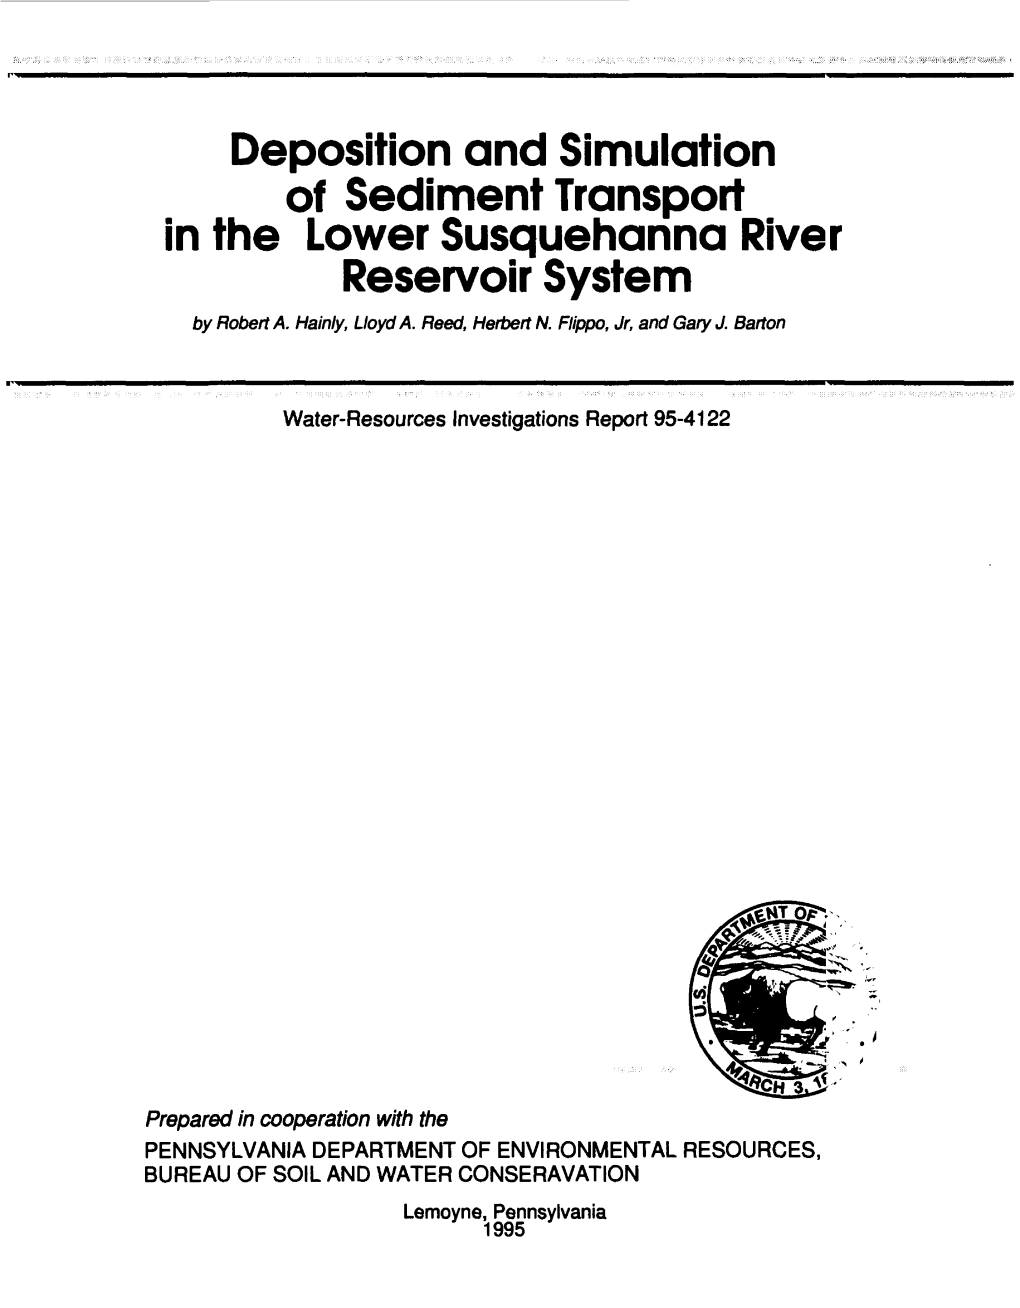 Deposition and Simulation of Sediment Transport in the Lower Susquehanna River Reservoir System by Robert A